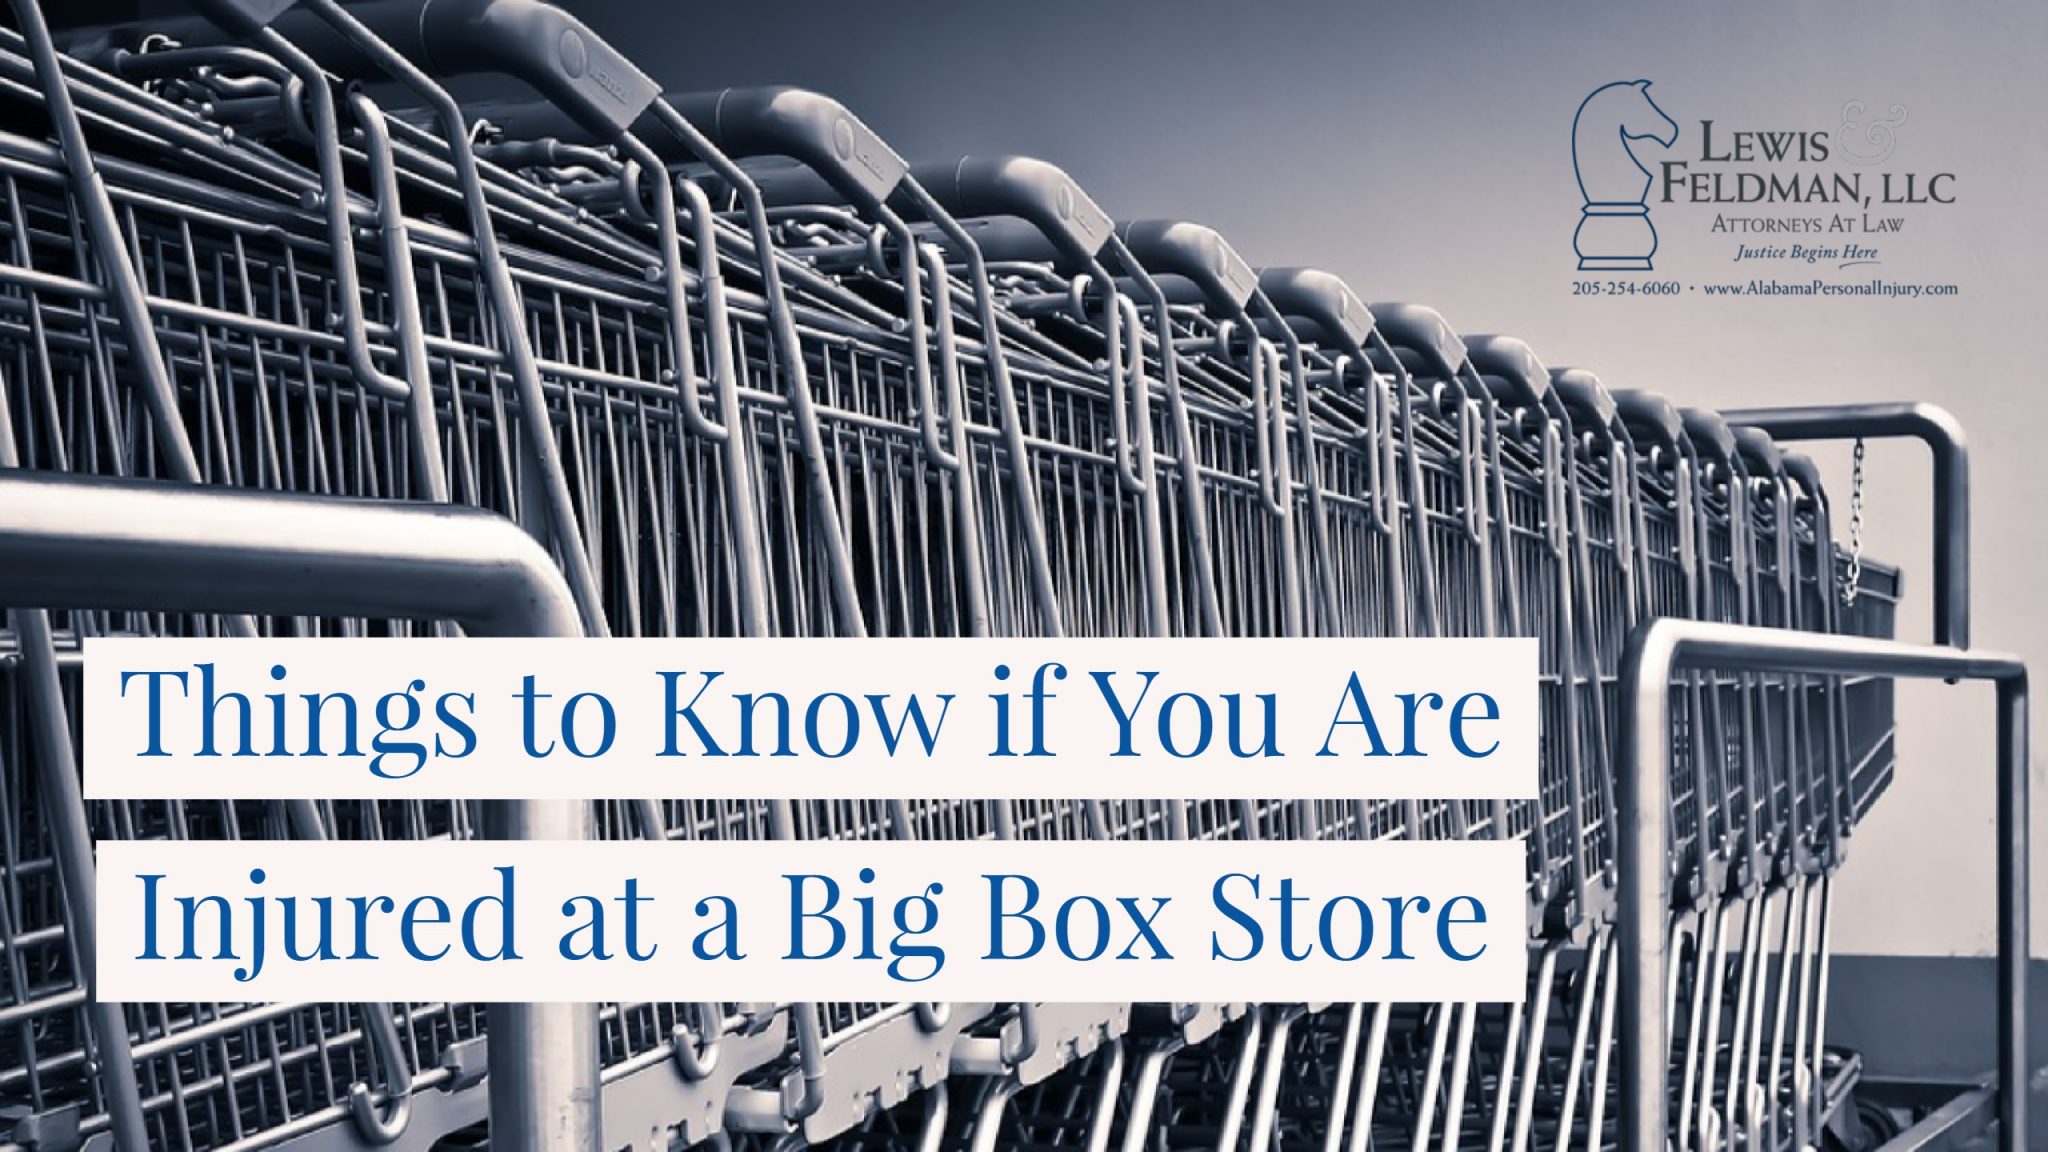 Things to Know if You Are Injured at a Big Box Store